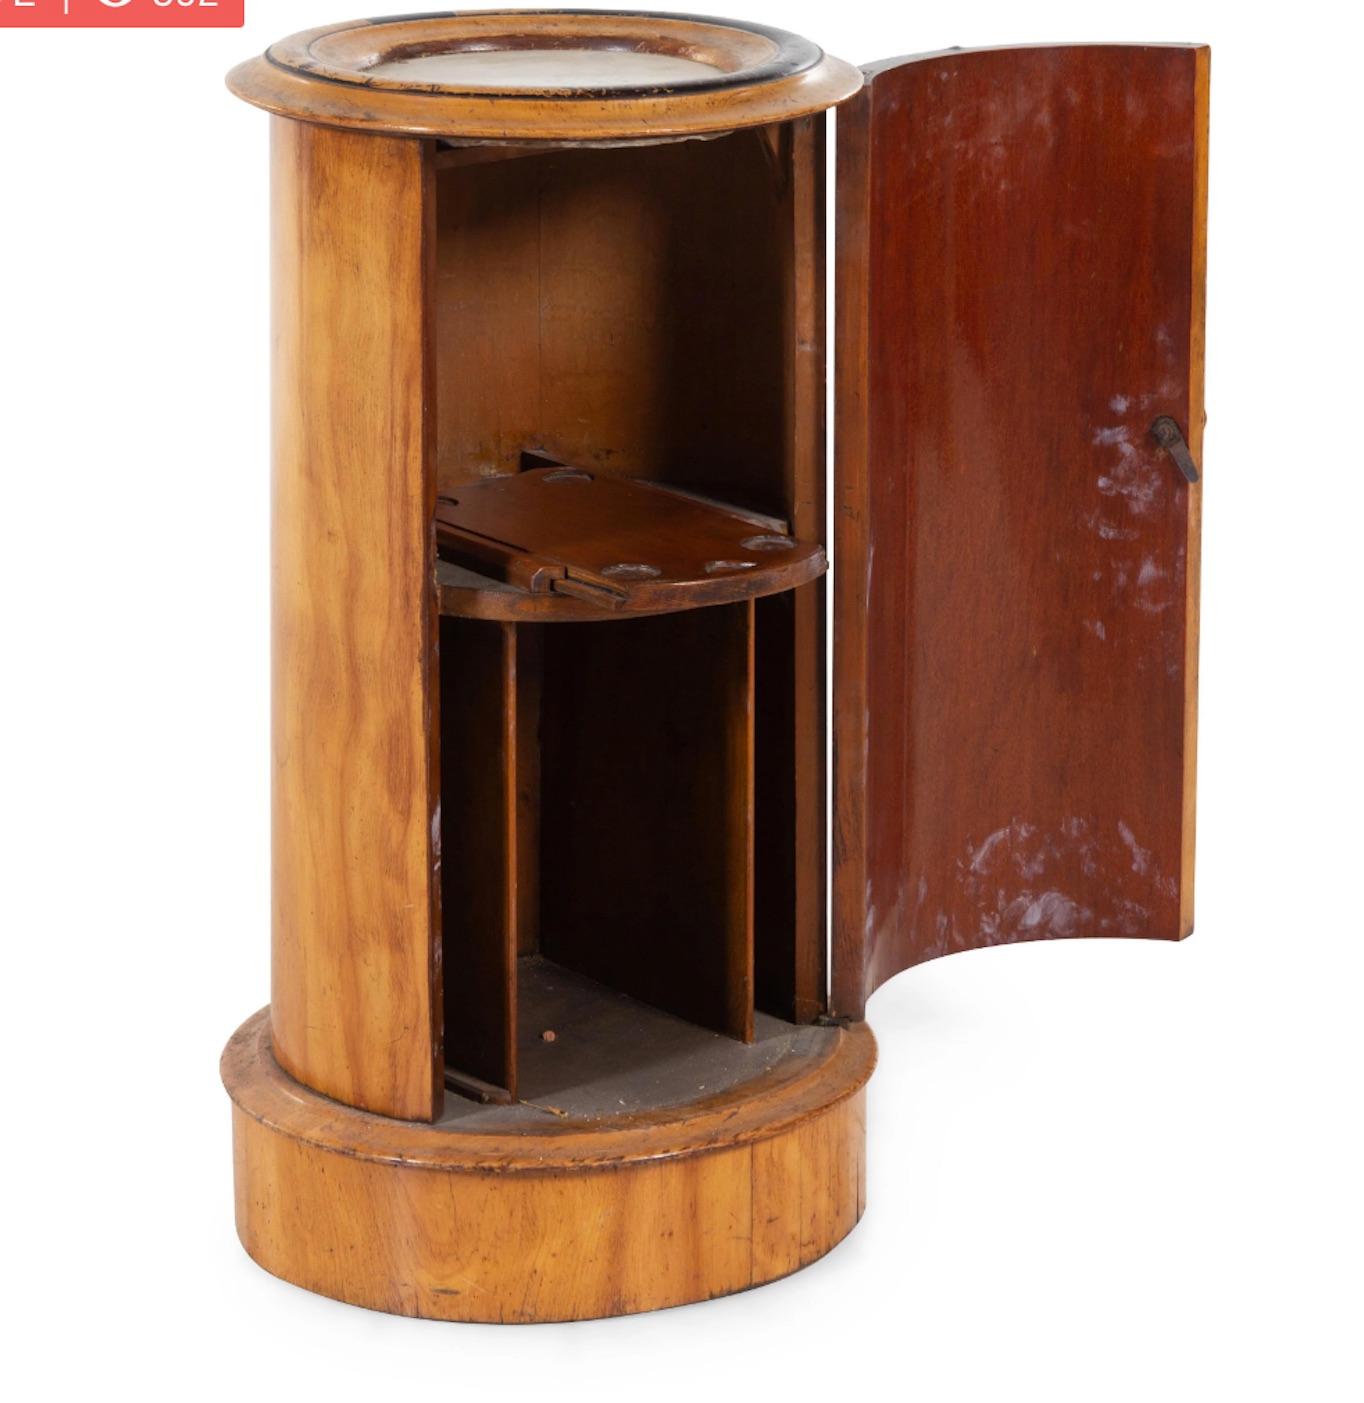 Handsome associated pair English mahogany cylindrical side table with one white marble top, one black marble top. Great color and proportion for a tight space with storage underneath.